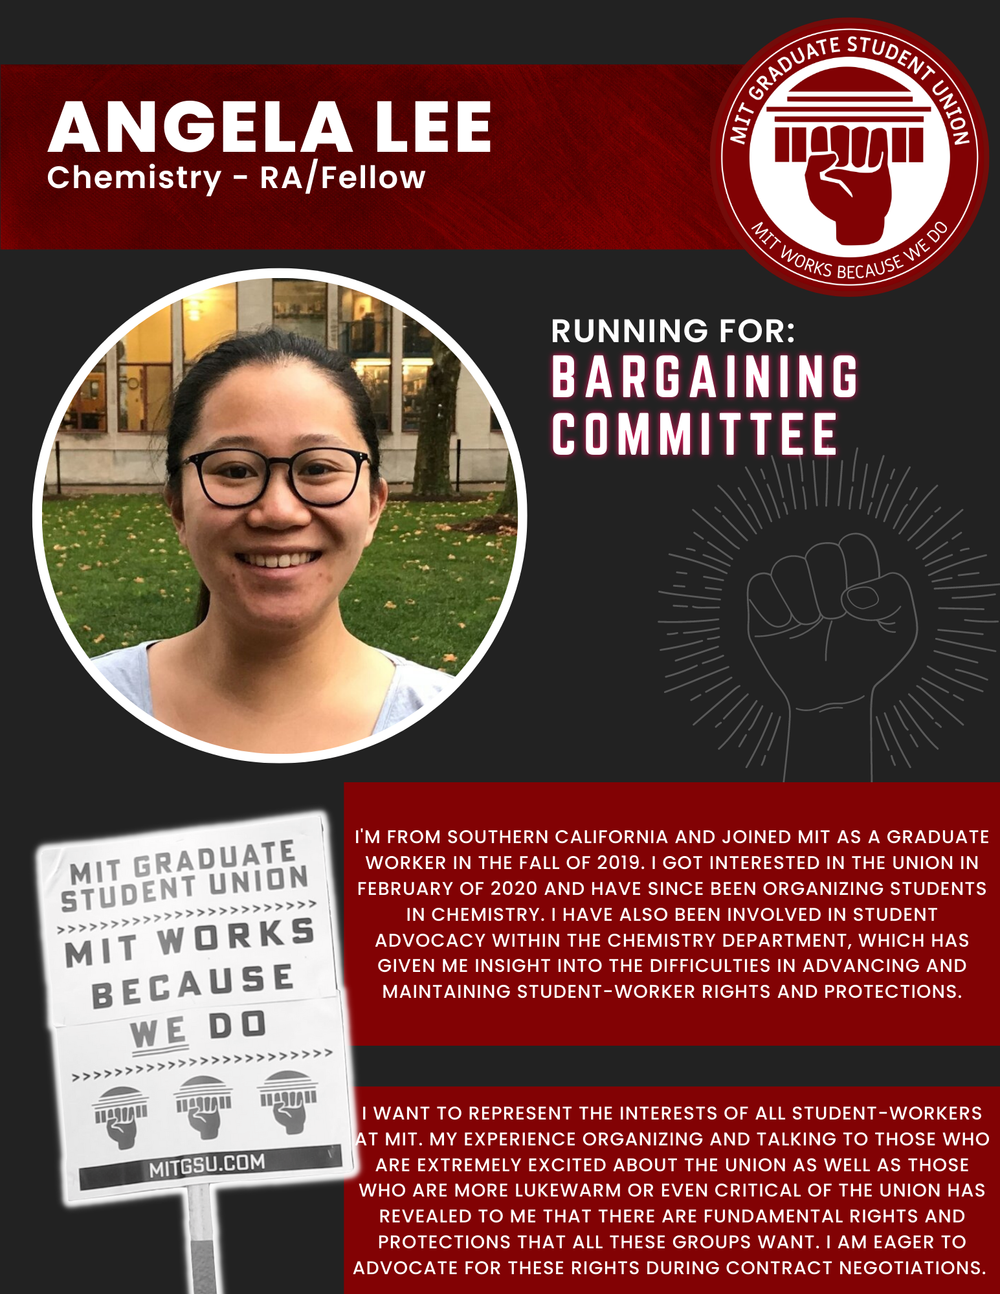  ANGELA LEE Chemistry - RA/Fellow   RUNNING FOR: Bargaining Committee  I'M FROM SOUTHERN CALIFORNIA AND JOINED MIT AS A GRADUATE WORKER IN THE FALL OF 2019. I GOT INTERESTED IN THE UNION IN FEBRUARY OF 2020 AND HAVE SINCE BEEN ORGANIZING STUDENTS IN 